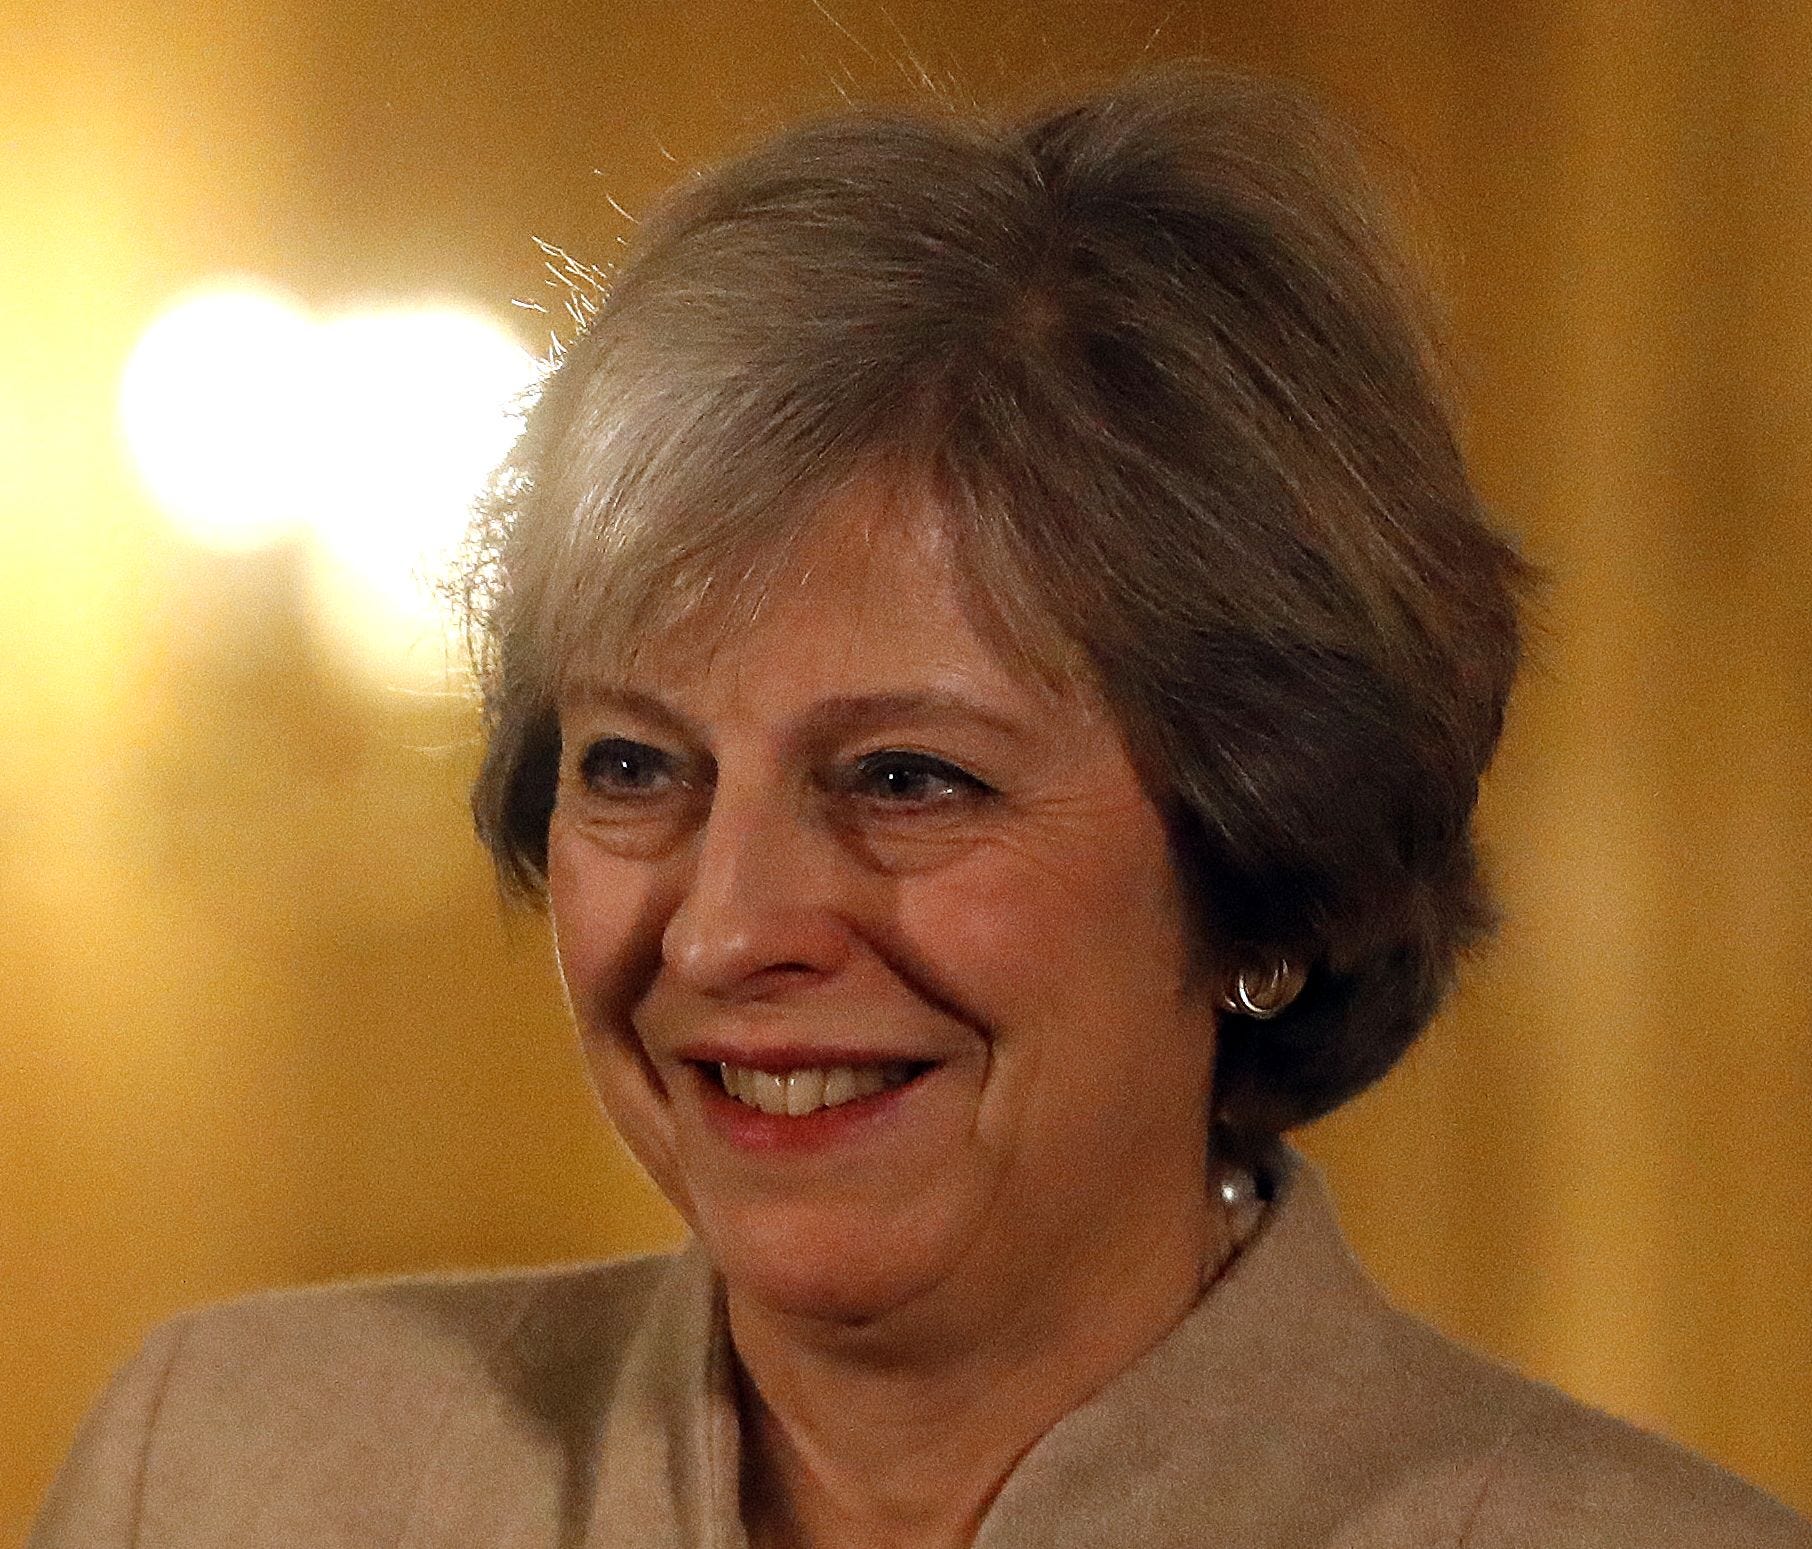 British Prime Minister Theresa May speaks during a press conference with New Zealand Prime Minister Bill English (not pictured) at 10 Downing Street in London on January 13, 2017.